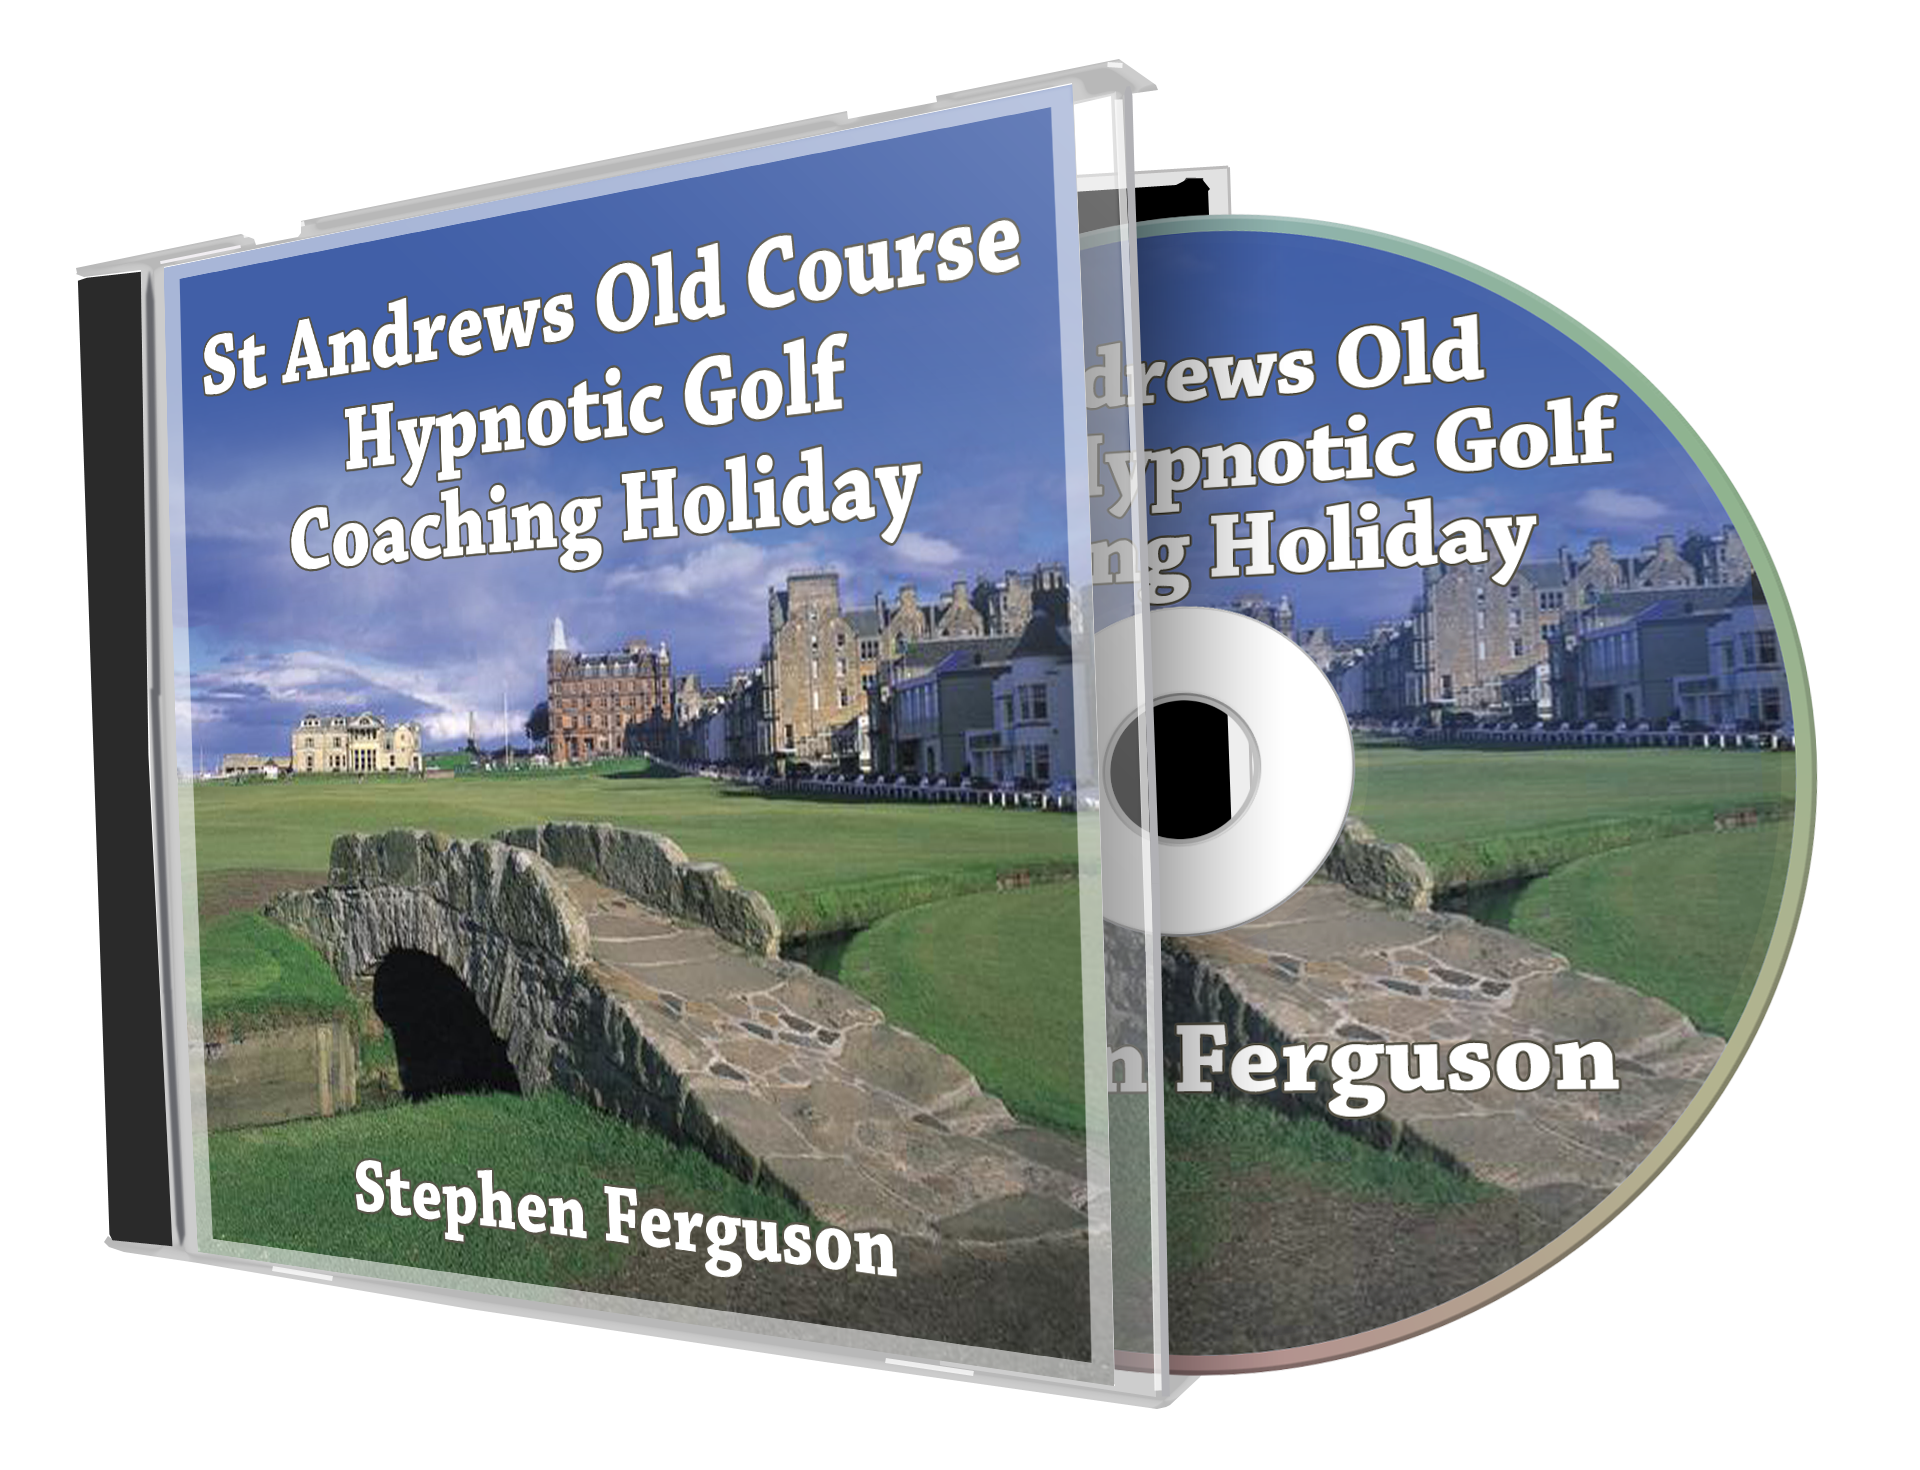 The Old Course Hypnotic Golf Holiday'